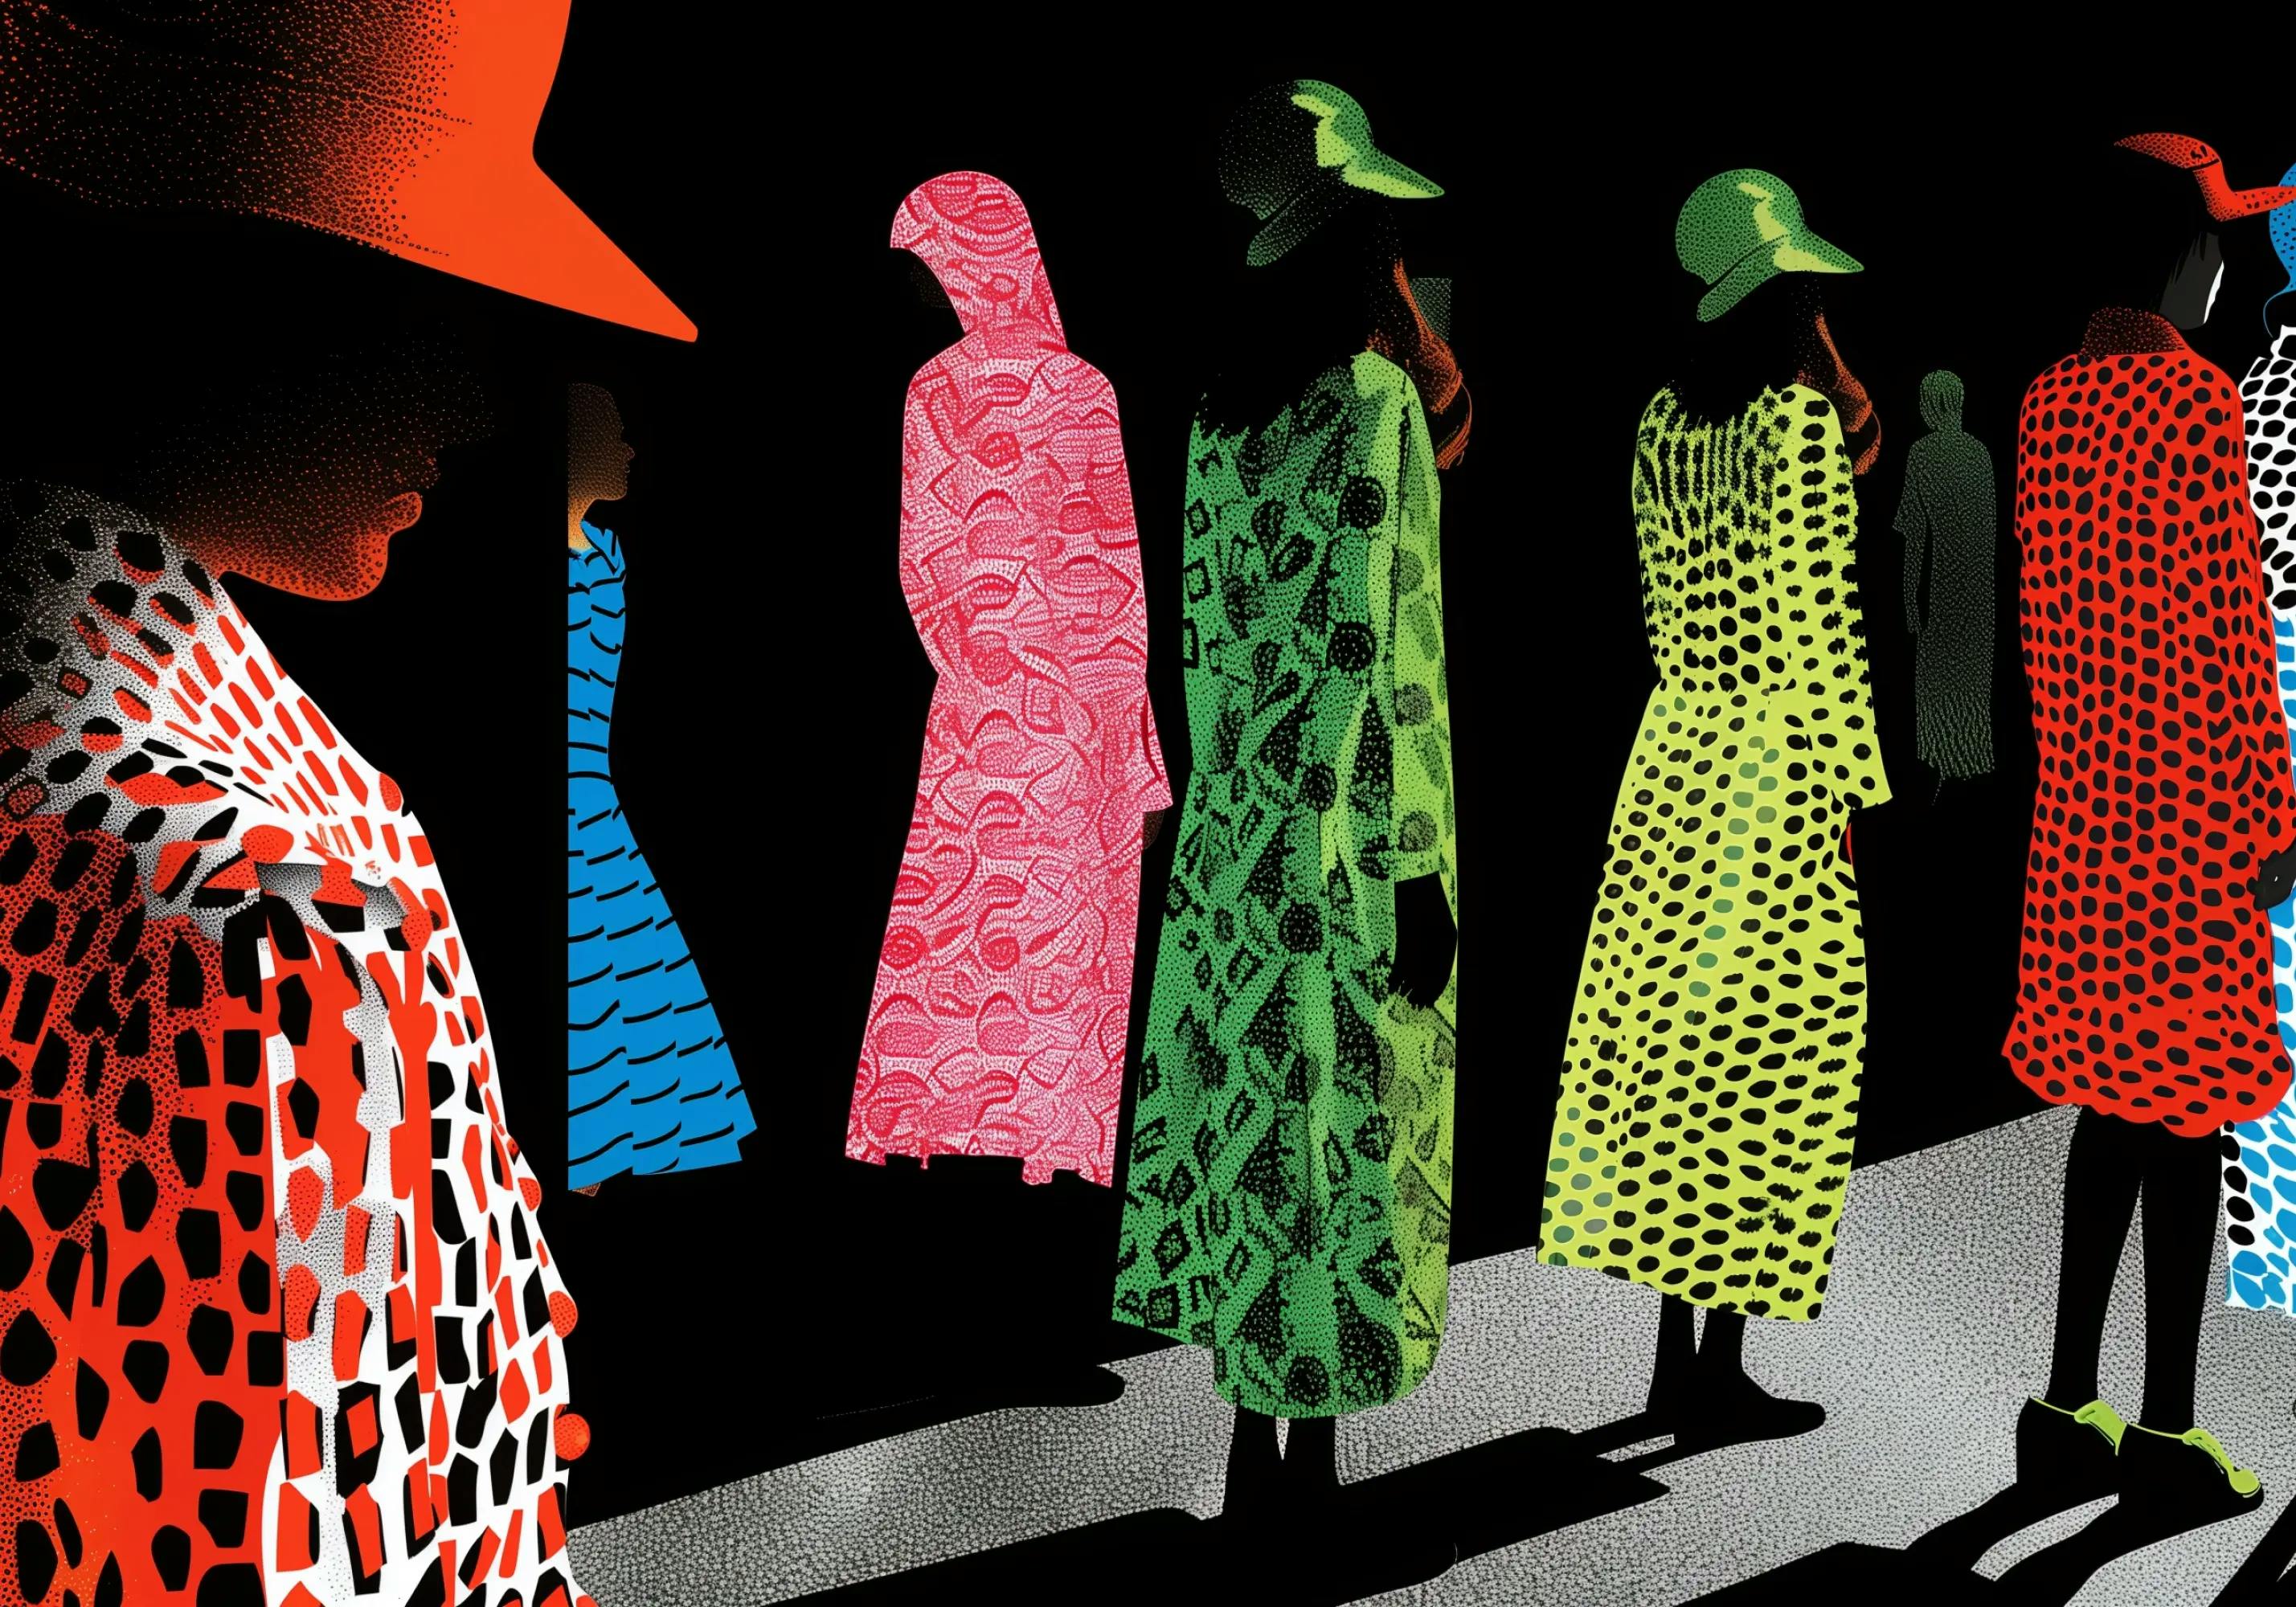 Silhouetted Illustrations of Women in High Fashion Clothing